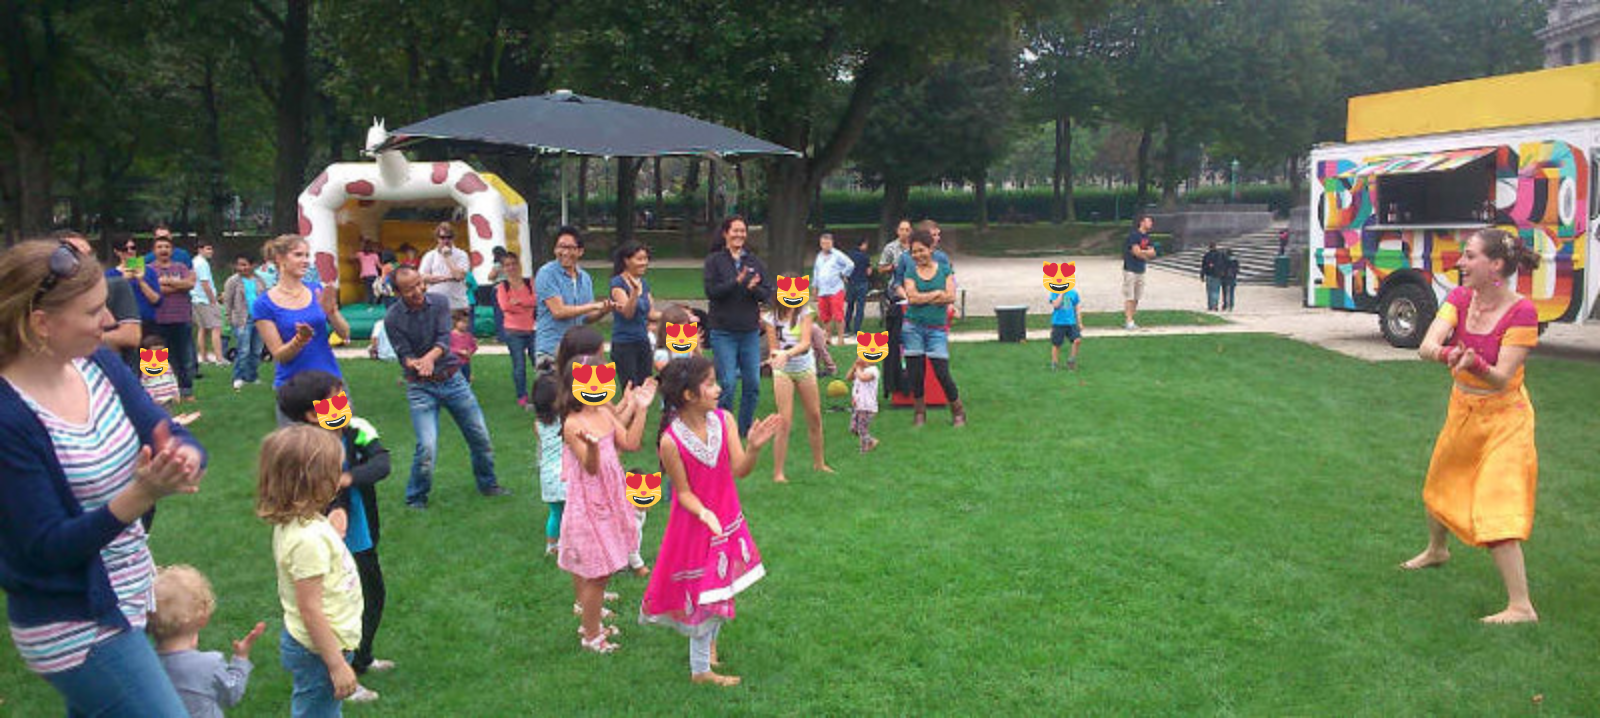 Cours Bollywood in the Parks enfants floutés.png